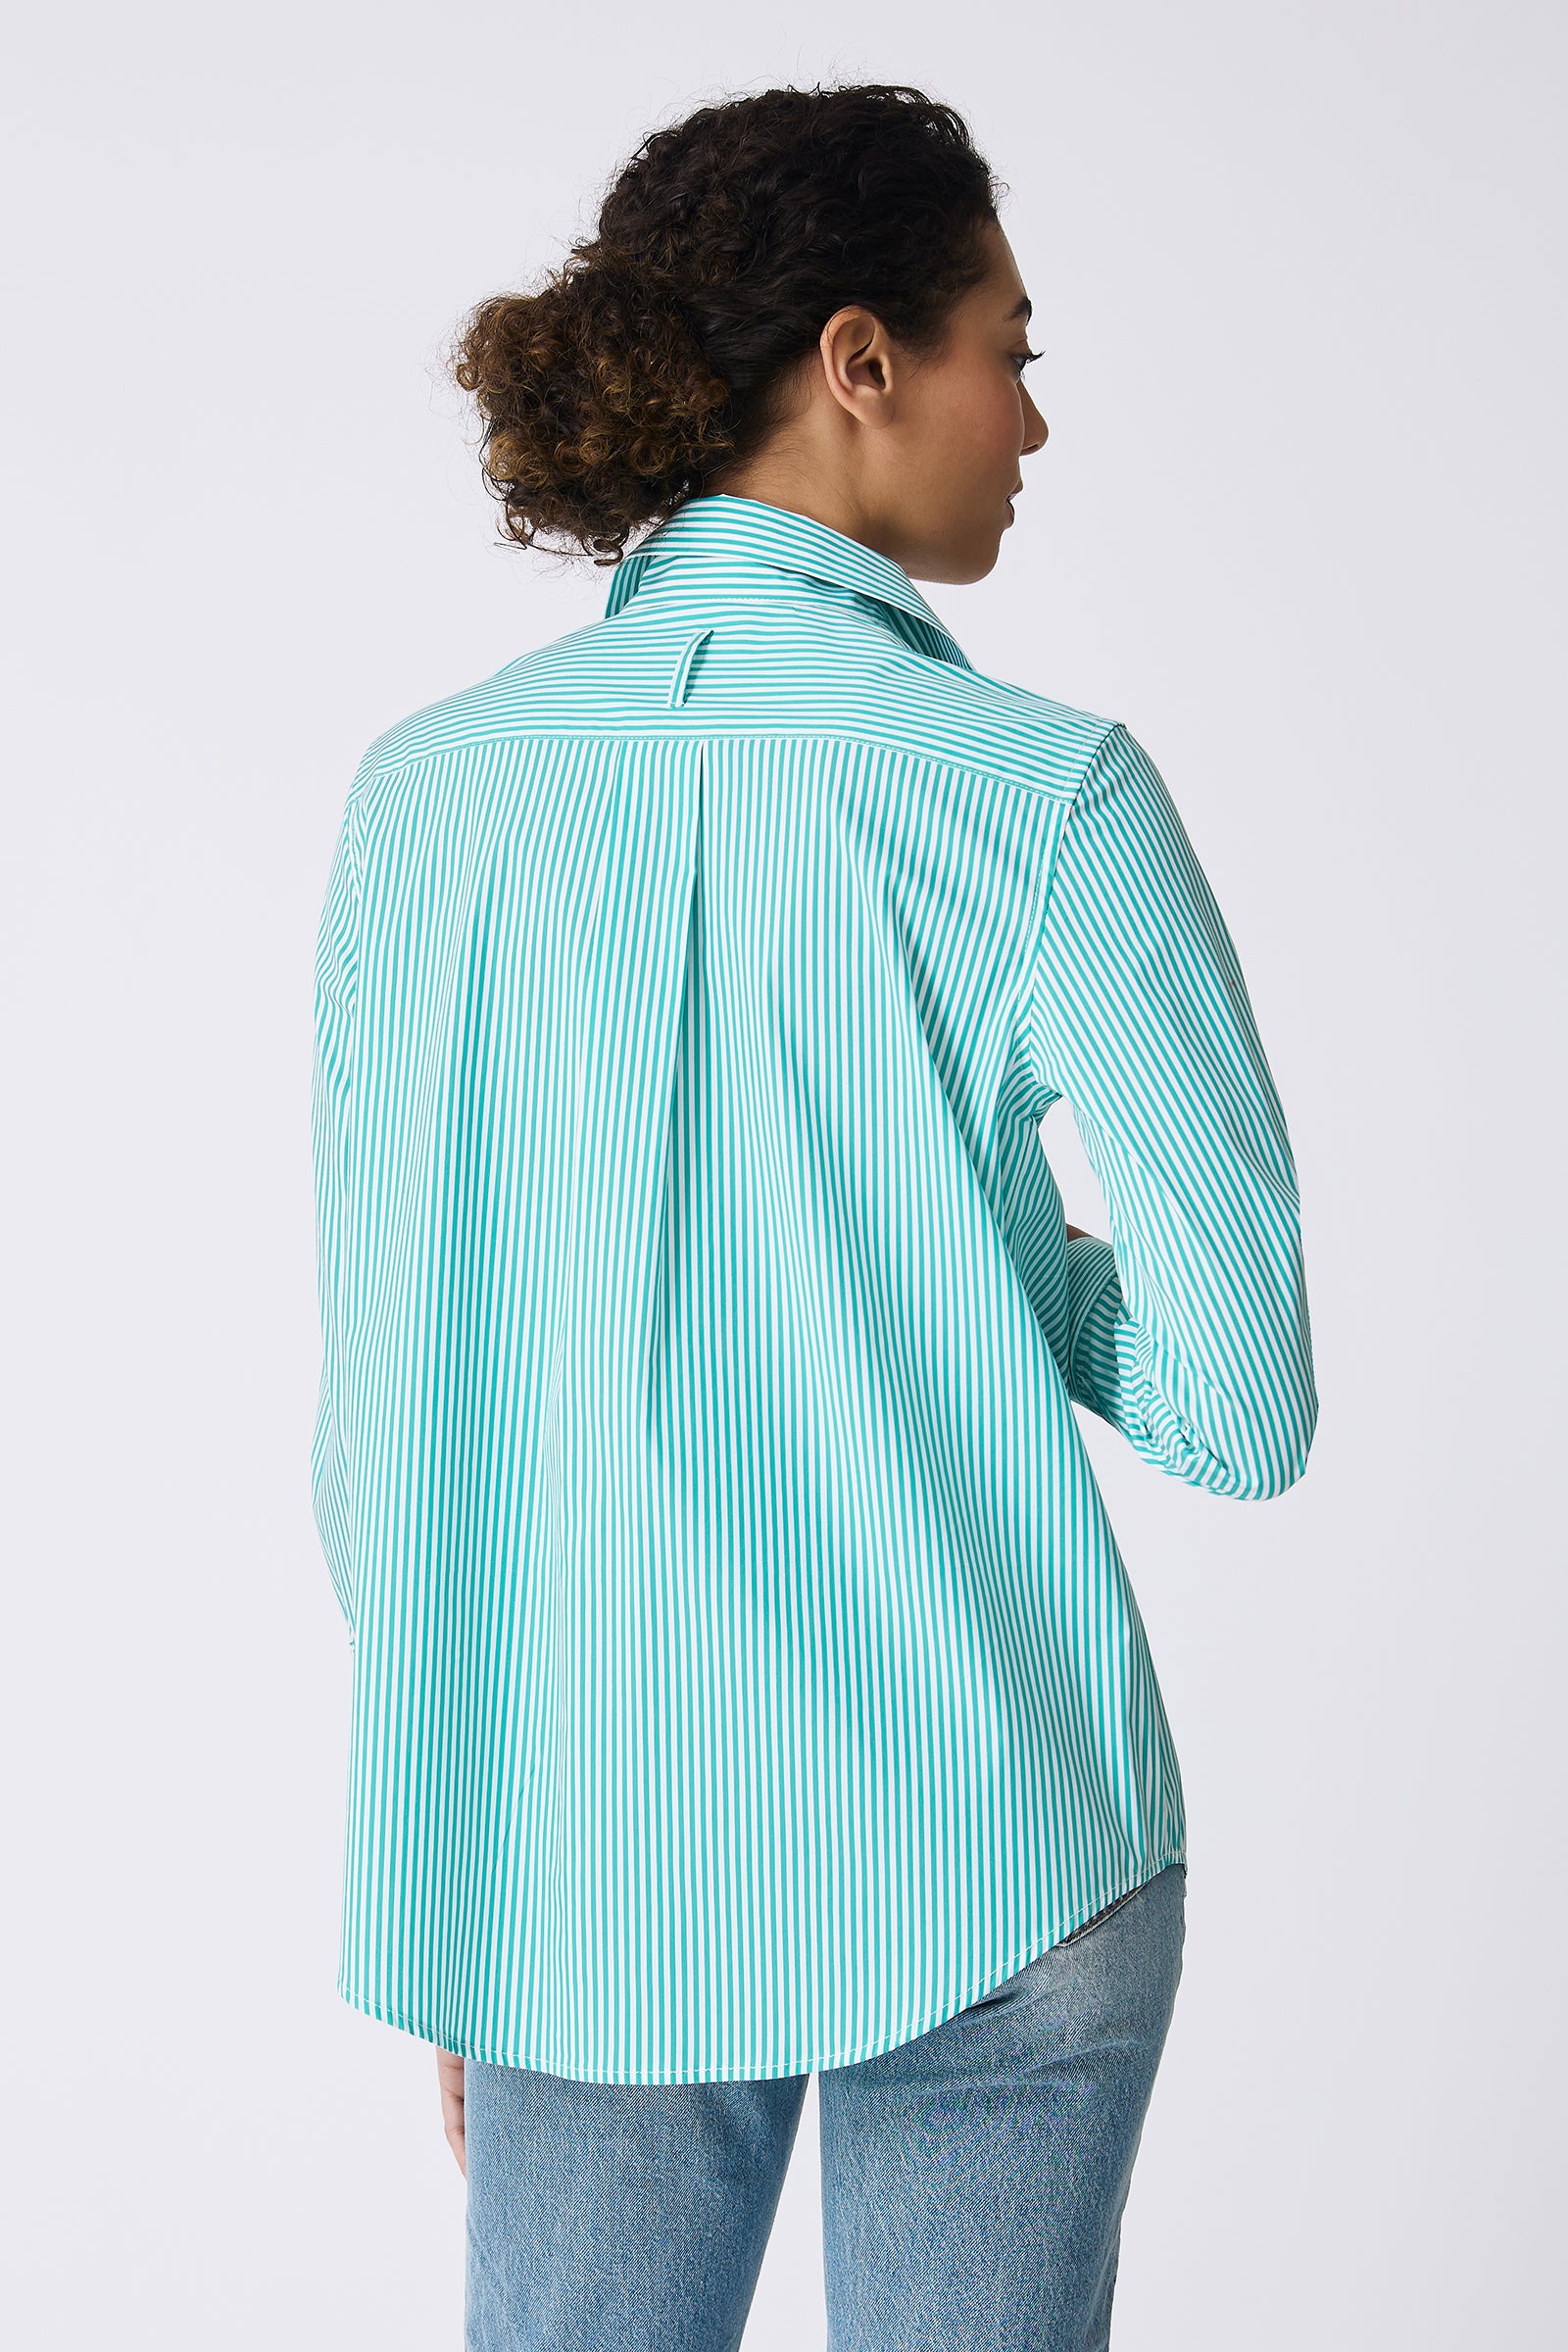 Kal Rieman image of the Ginna Box Pleat Shirt in Miami Stripe Green on model back view